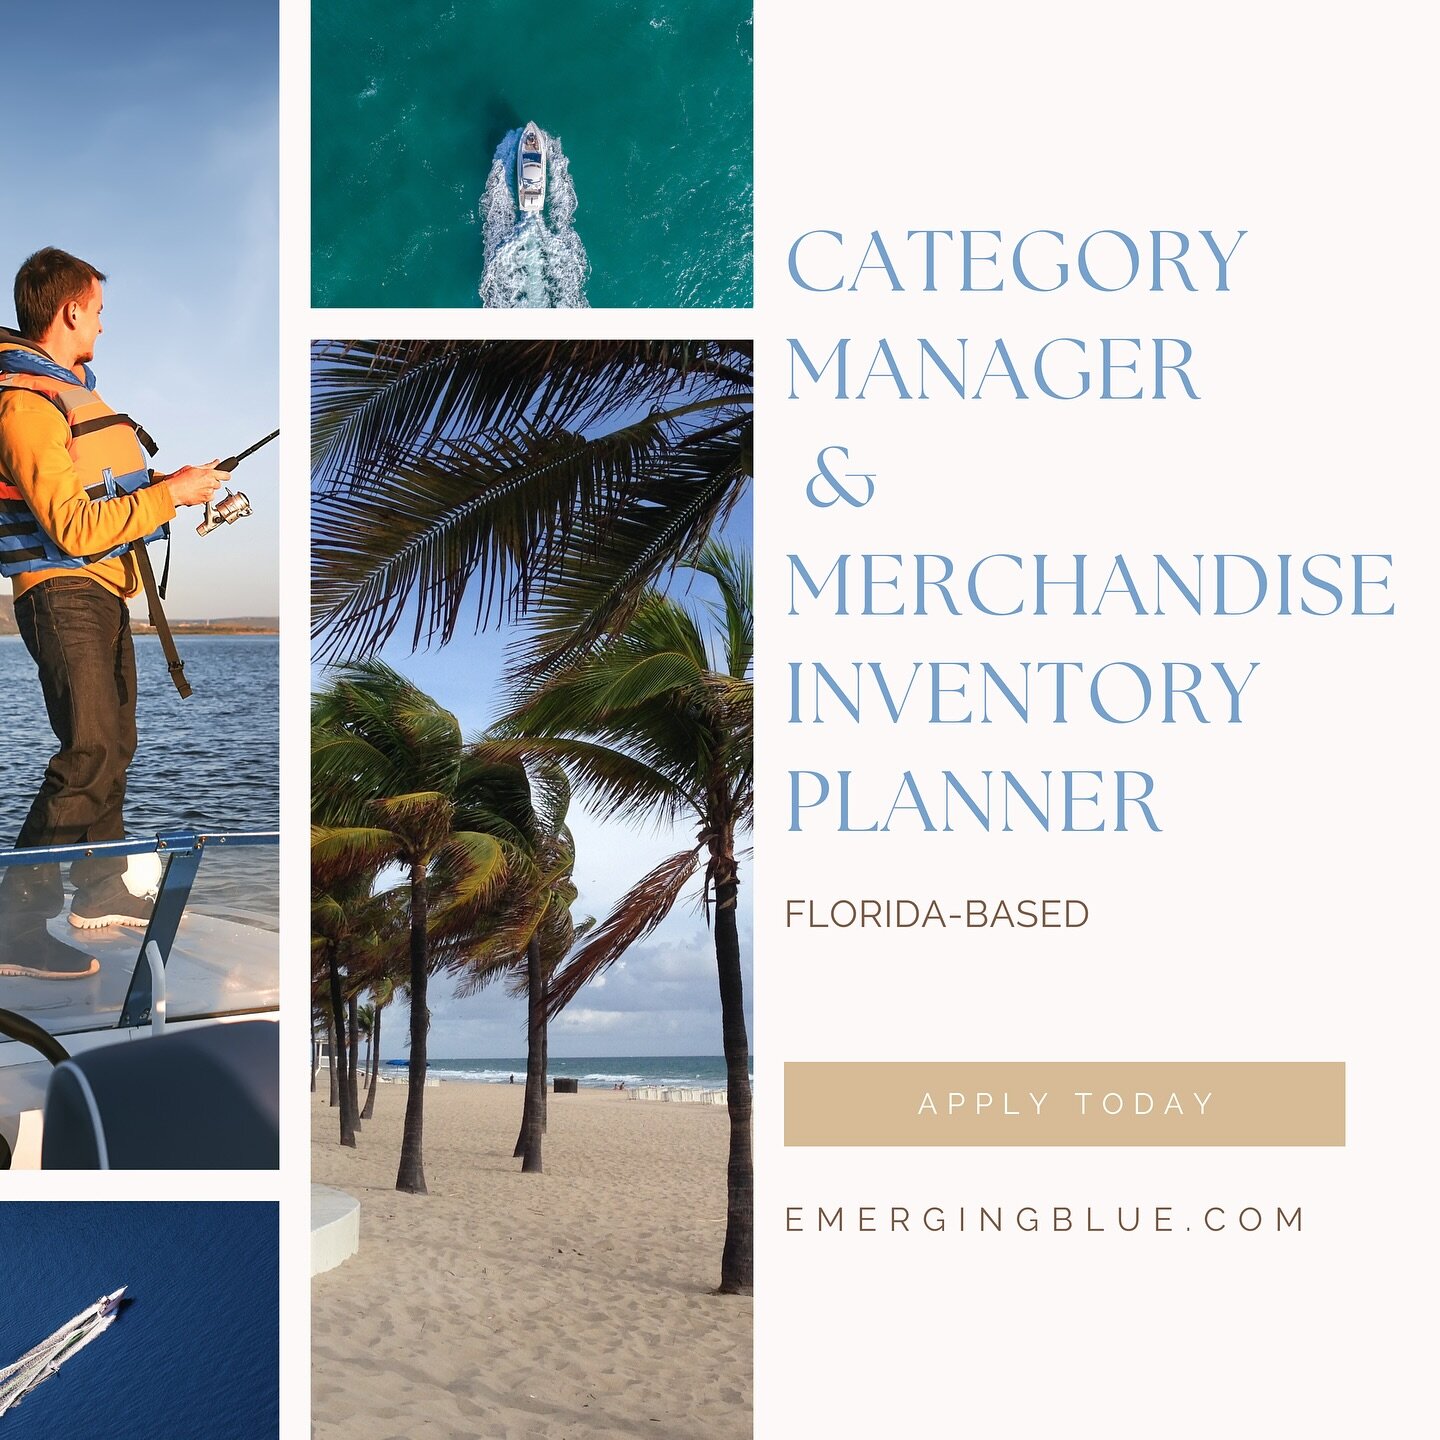 Two exciting new roles with an outdoor brand based in Florida! If you or someone you know may be interested, check them out at emergingblue.com

#hiring #outdoorbrand #merchandising #outdoor #jobs #careers #floridajobs #planning #categorymanagement #